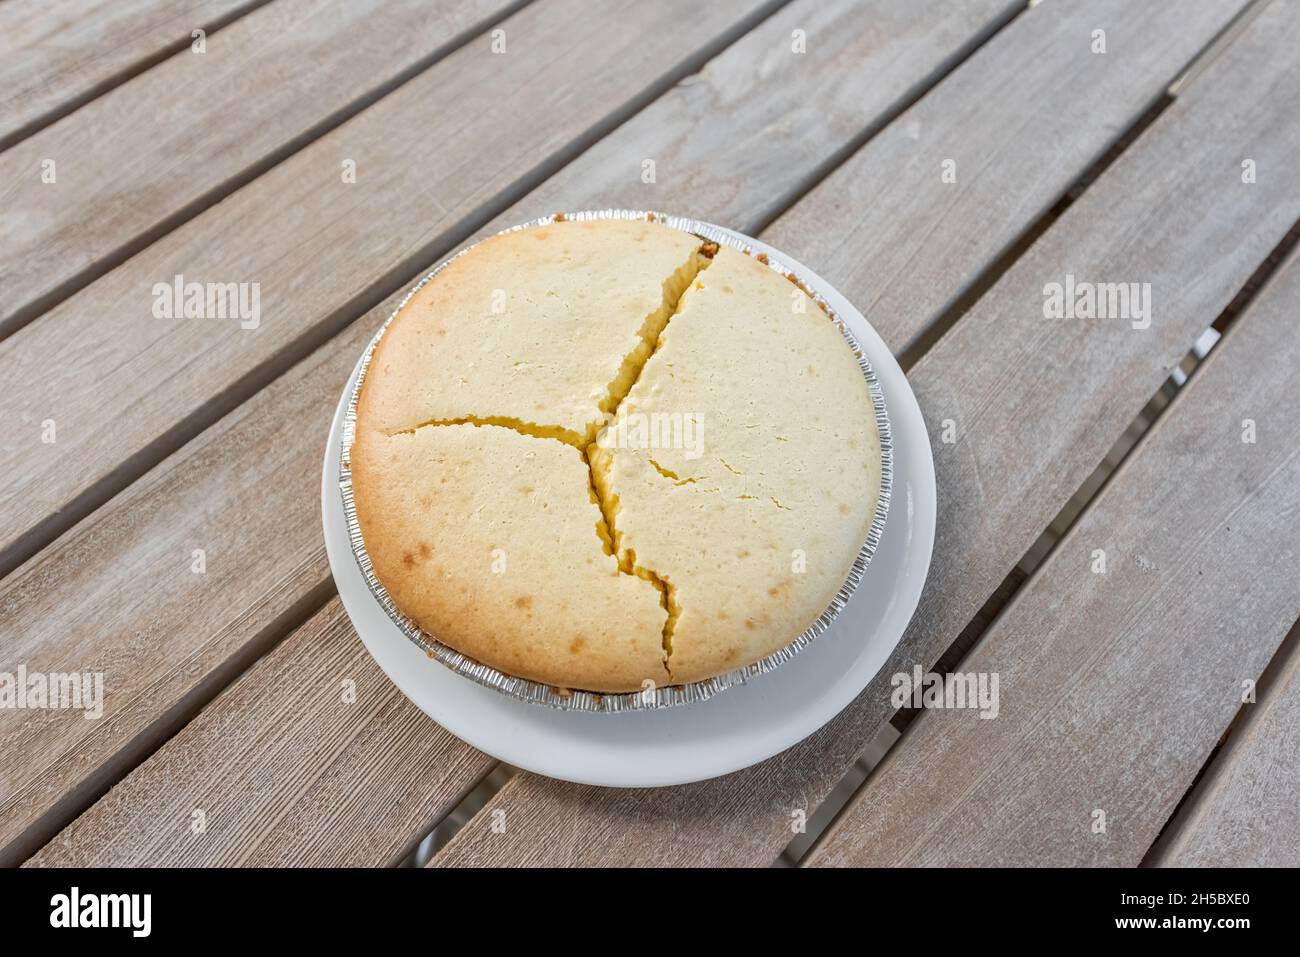 https://c8.alamy.com/comp/2H5BXE0/whole-plain-cheese-cake-cheesecake-on-plate-at-home-wooden-table-background-with-cracked-cracks-cooking-fail-due-to-temperature-2H5BXE0.jpg